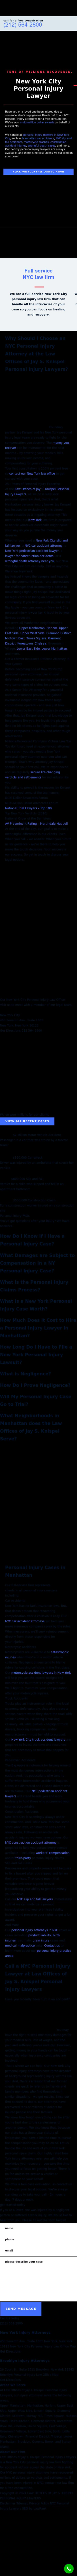 Law Offices of Jay S. Knispel Personal Injury Lawyers - New York NY Lawyers